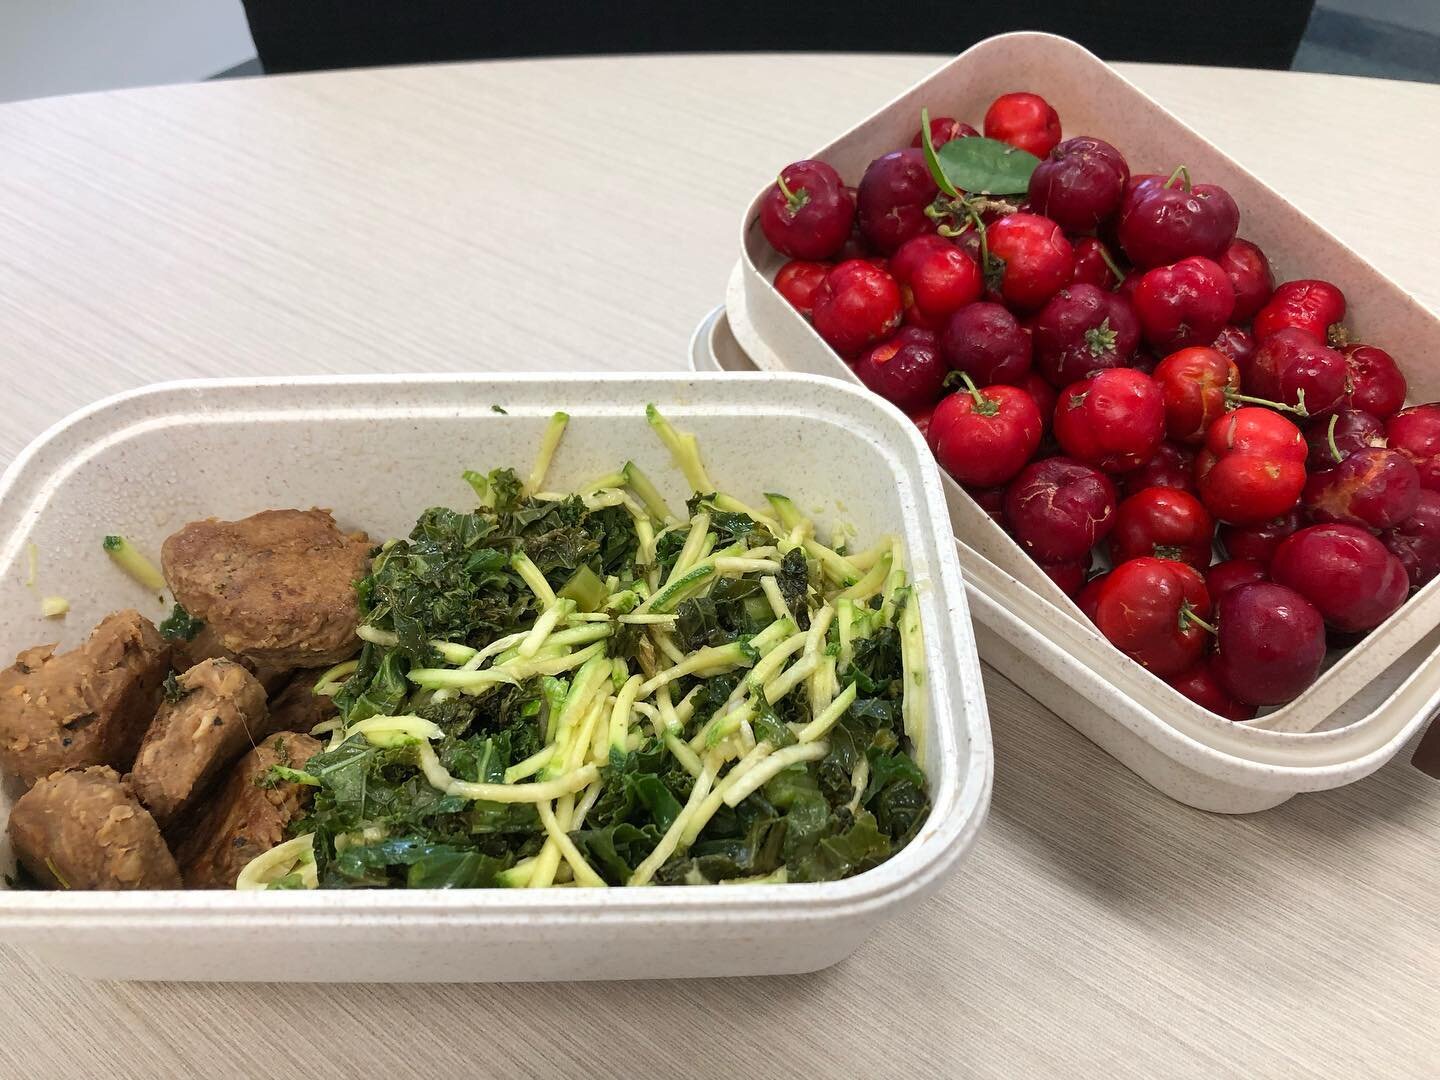 My husband is very good at experimenting with our home grown produce. Todays lunch is shredded pumkini (cross between a zucchini and pumpkin) with seared kale in a soy and garlic dressing. Served with some meatless balls.  Acerola cherries for desser